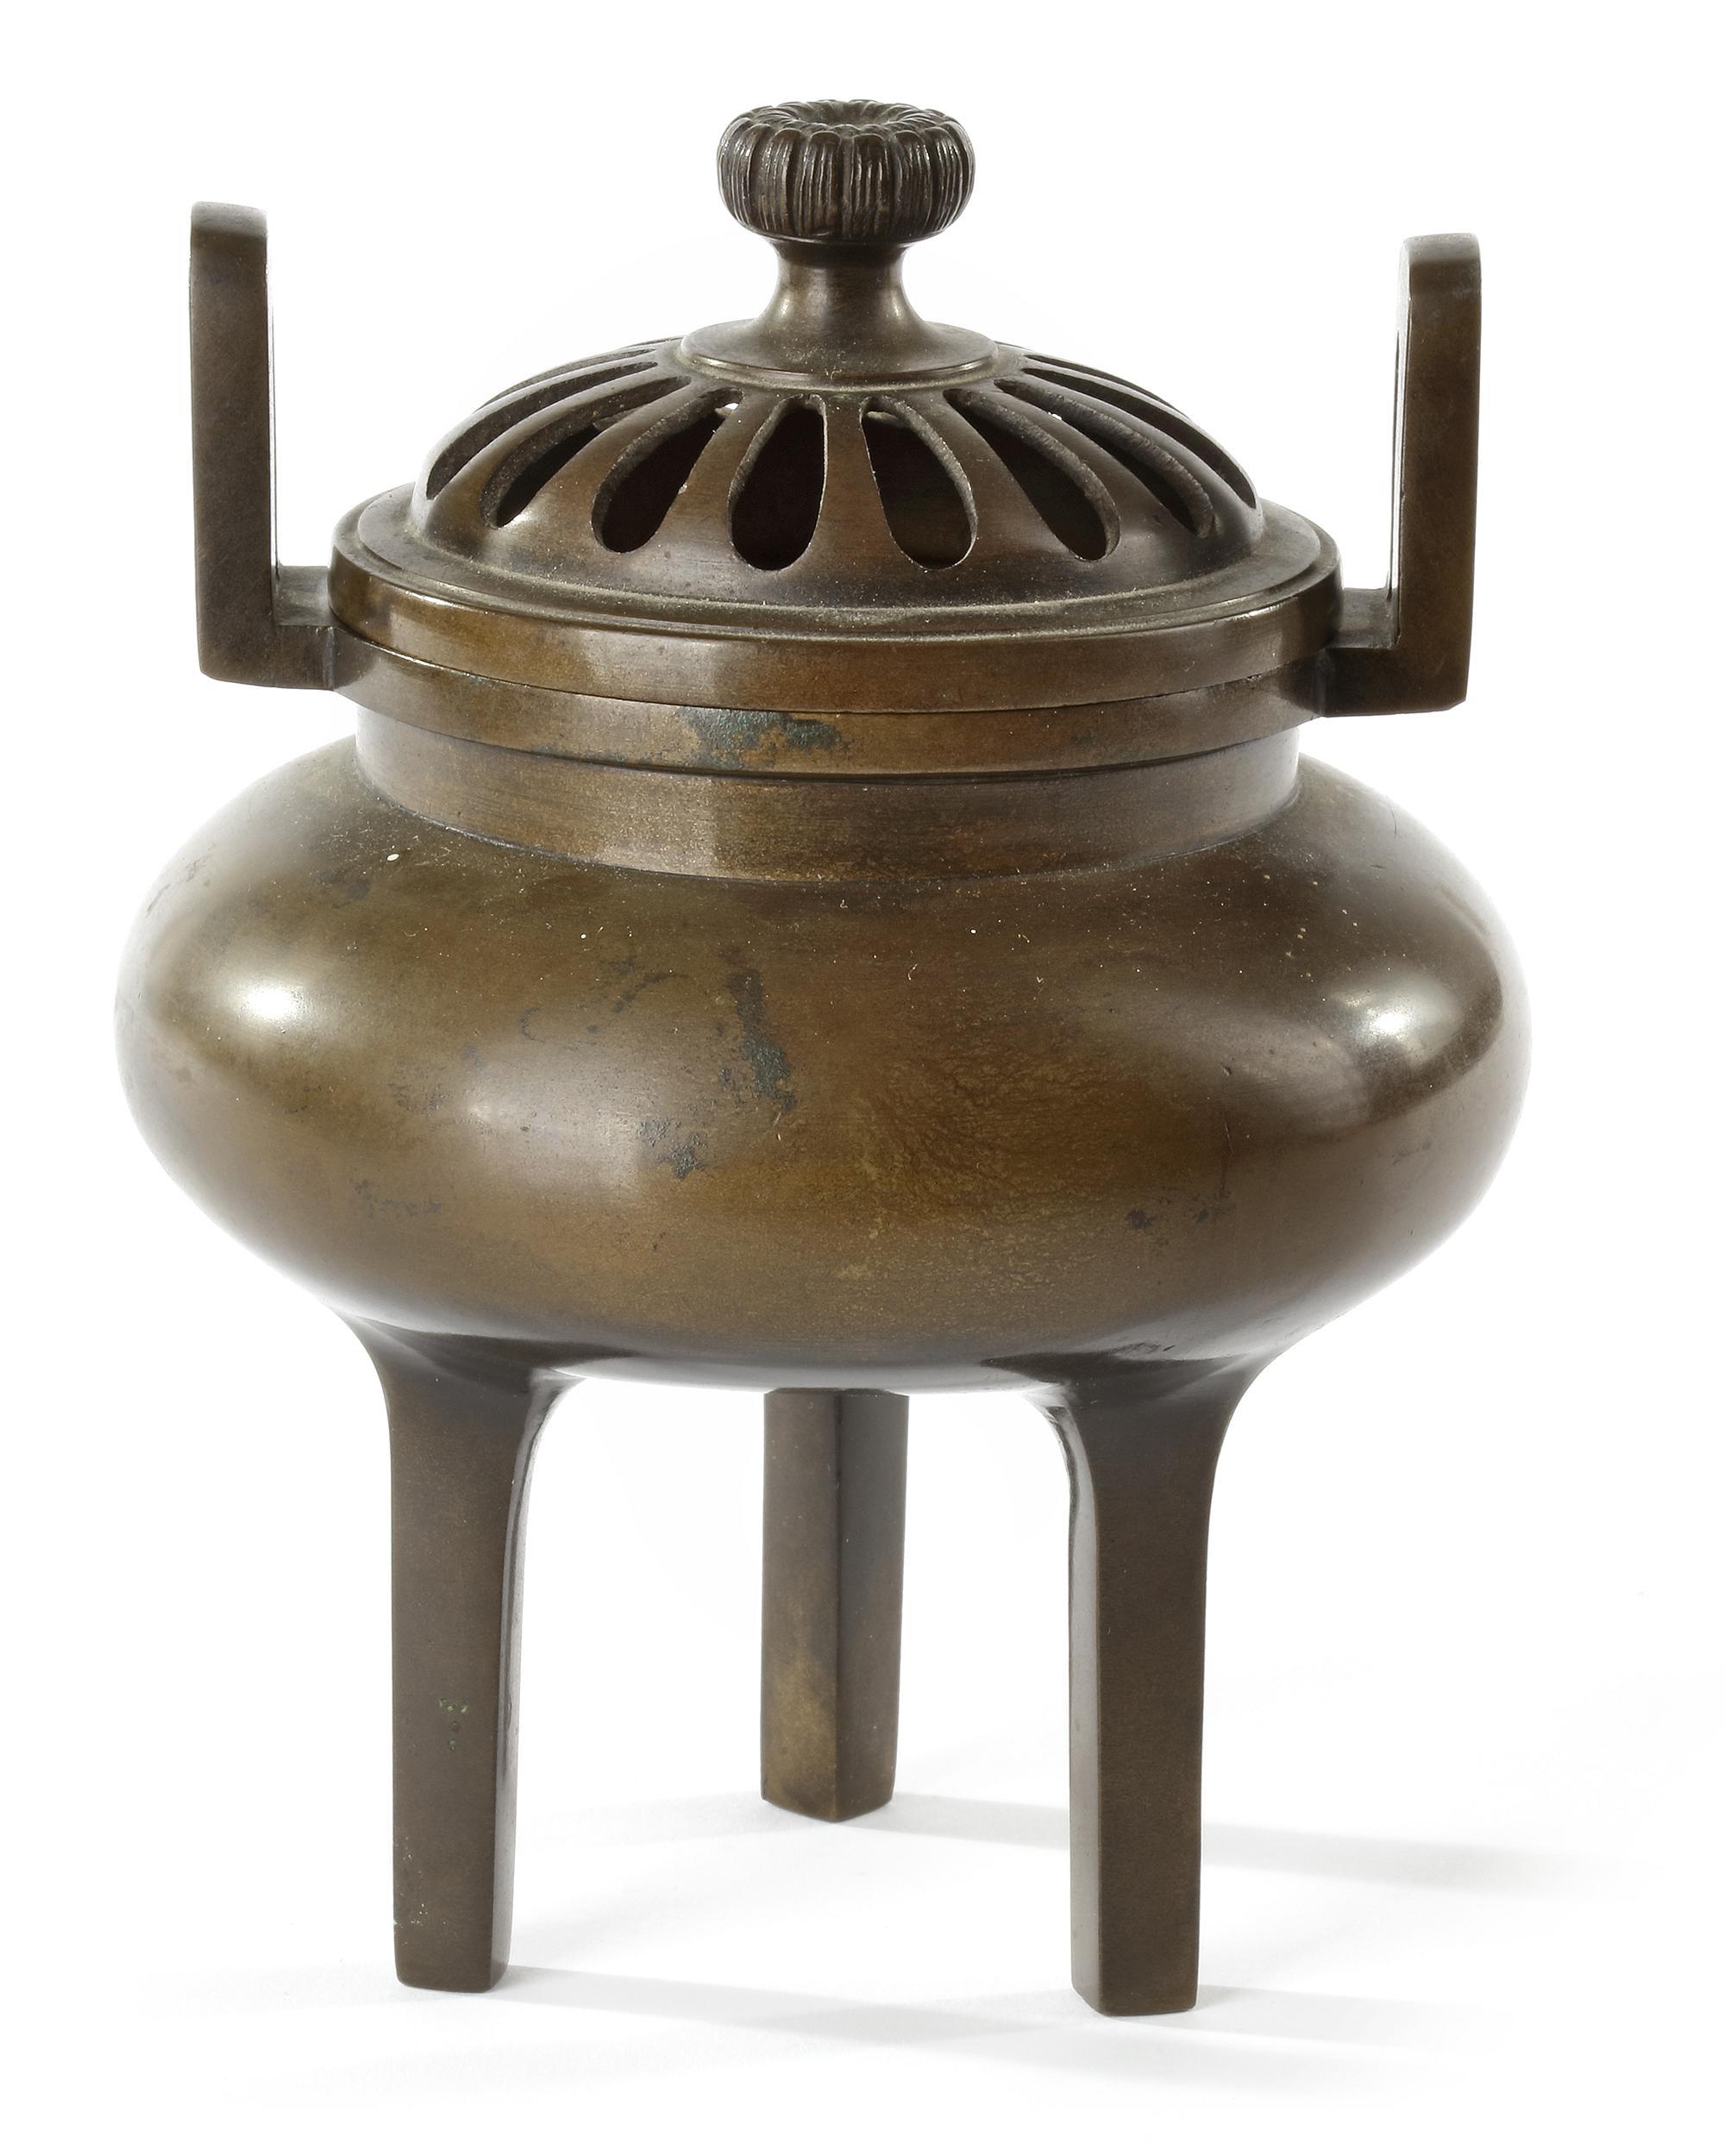 A JAPANESE BRONZE INCENSE BURNER (KOURO), MEIJI PERIOD (LATE 19TH CENTURY) - Image 3 of 4